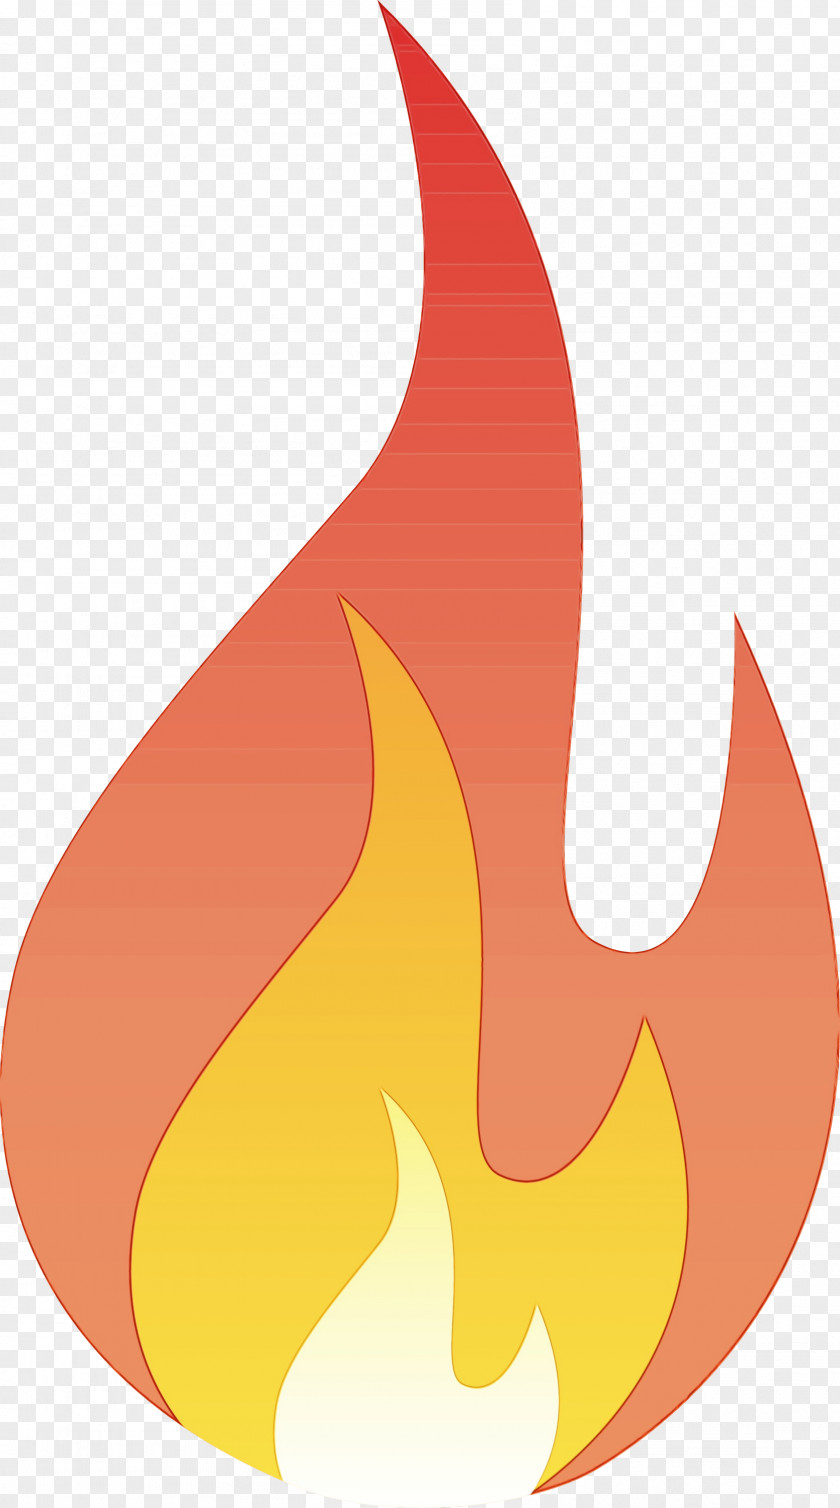 Flame PNG